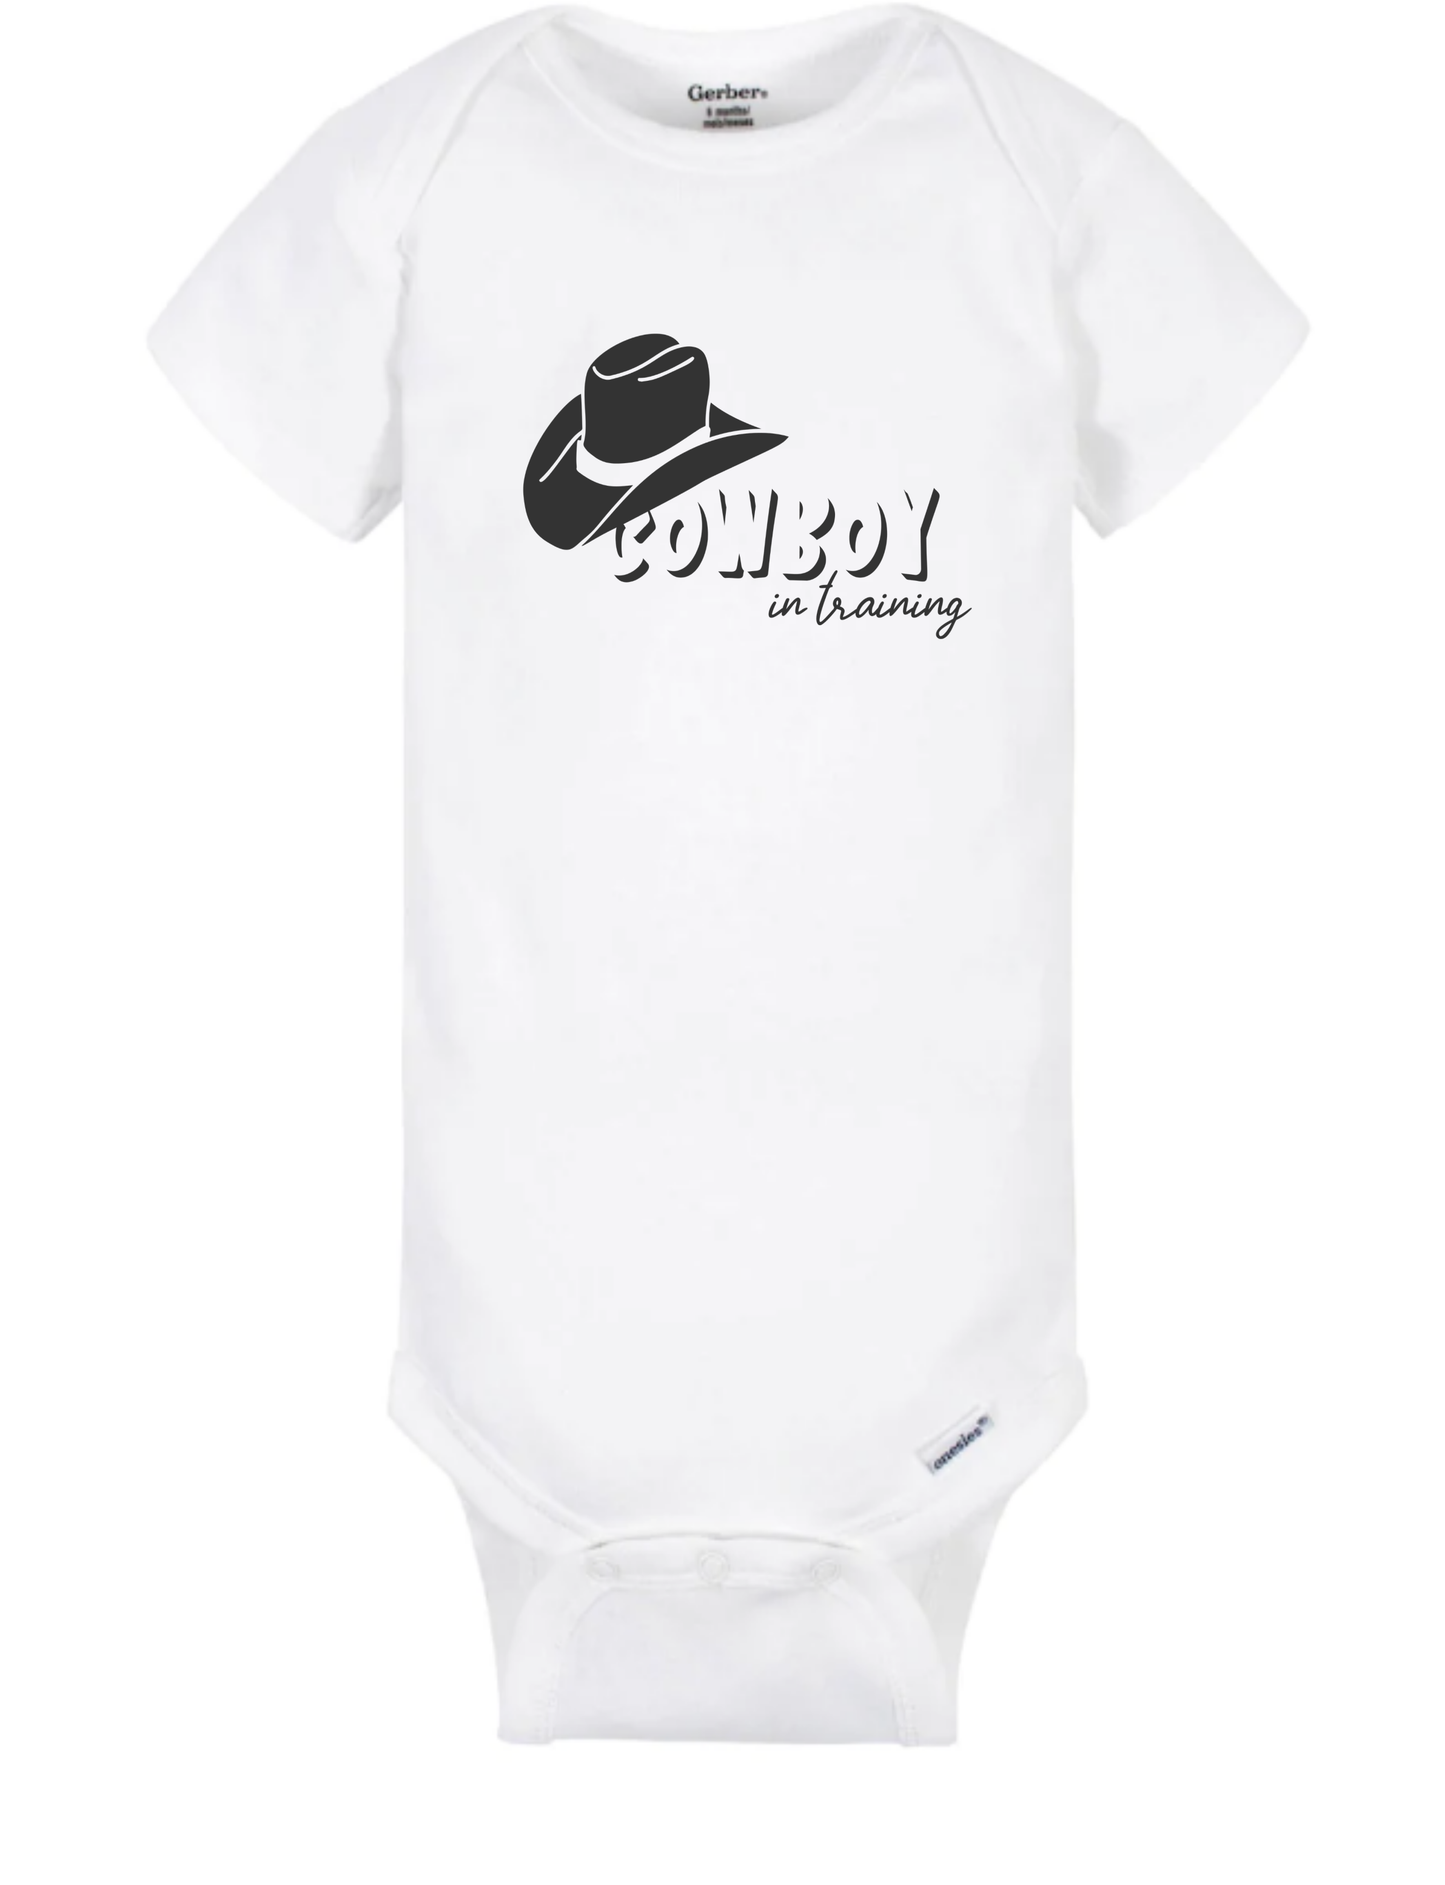 Cowboy in Training - Onesie Blue - Mister Snarky's